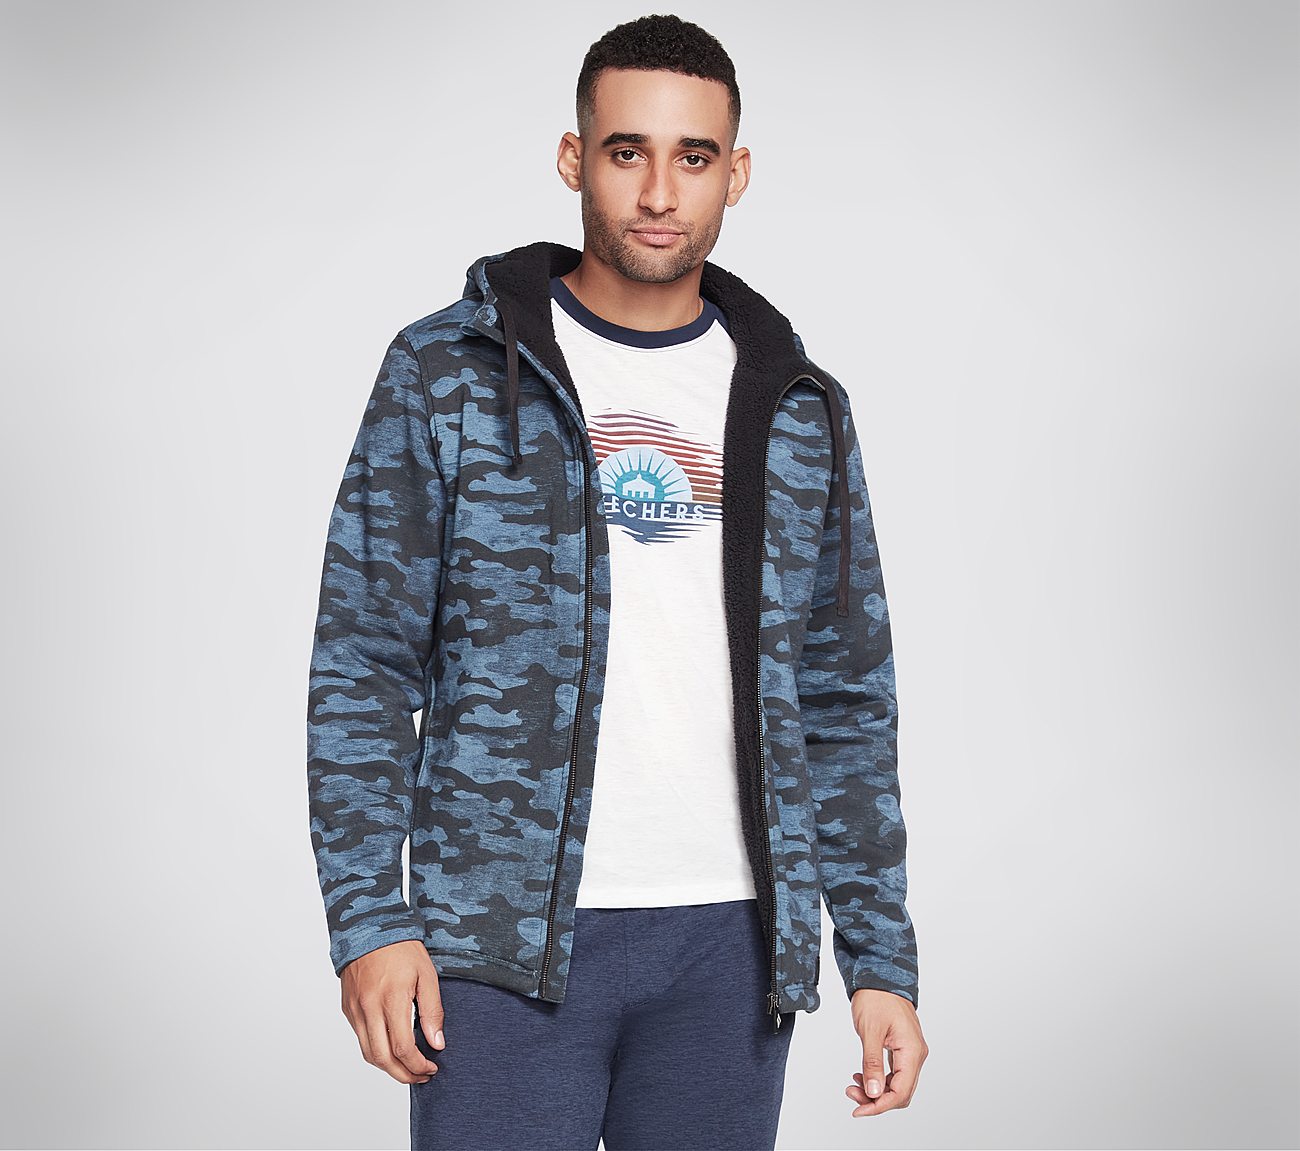 SKECH-SWEATS CAMO LOUNGE SHER, NAVY/MULTI Apparels Lateral View